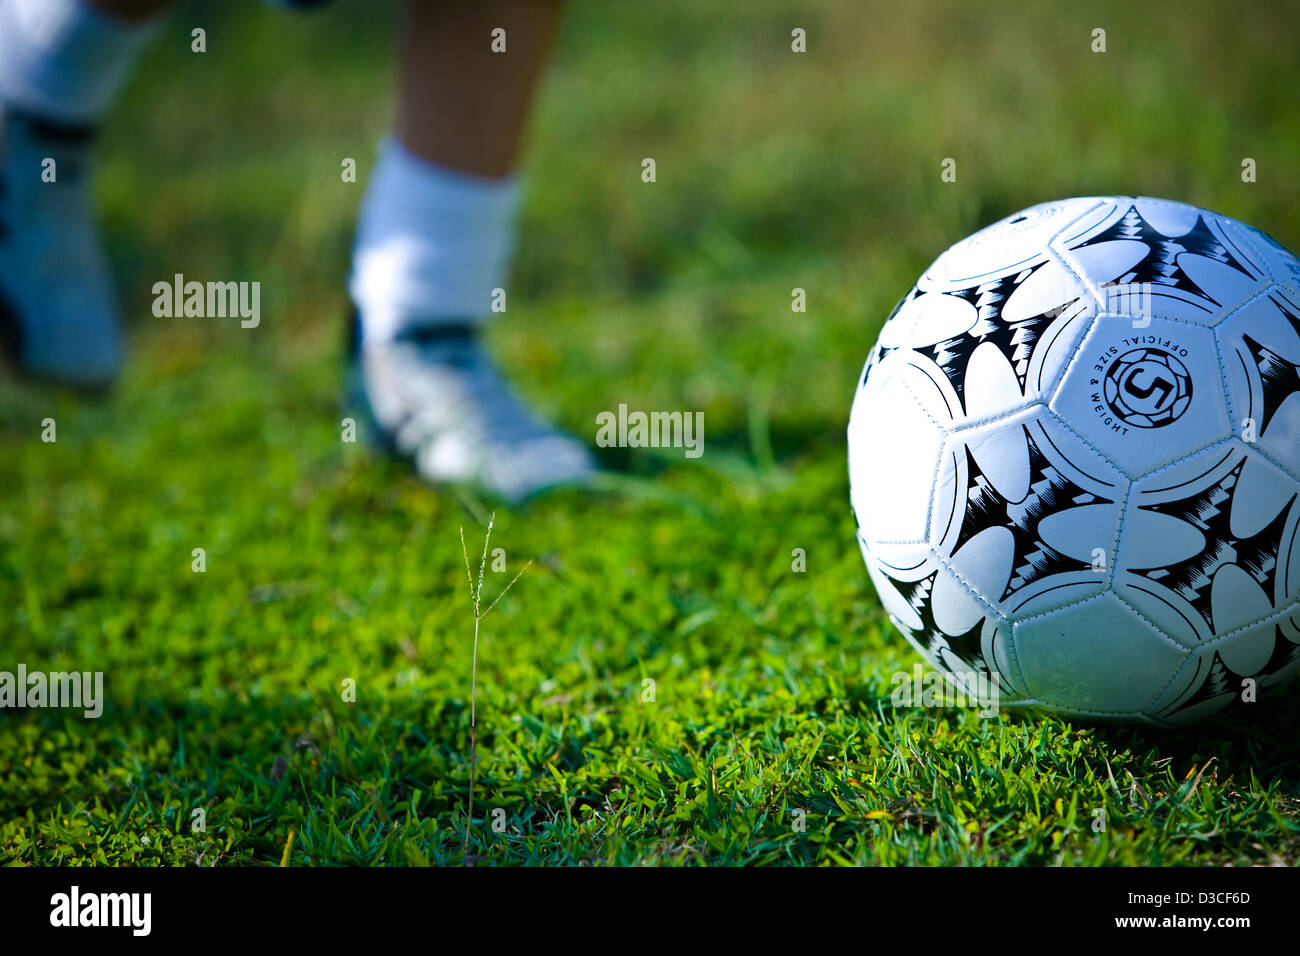 Sporting image of a person kicking a football Stock Photo